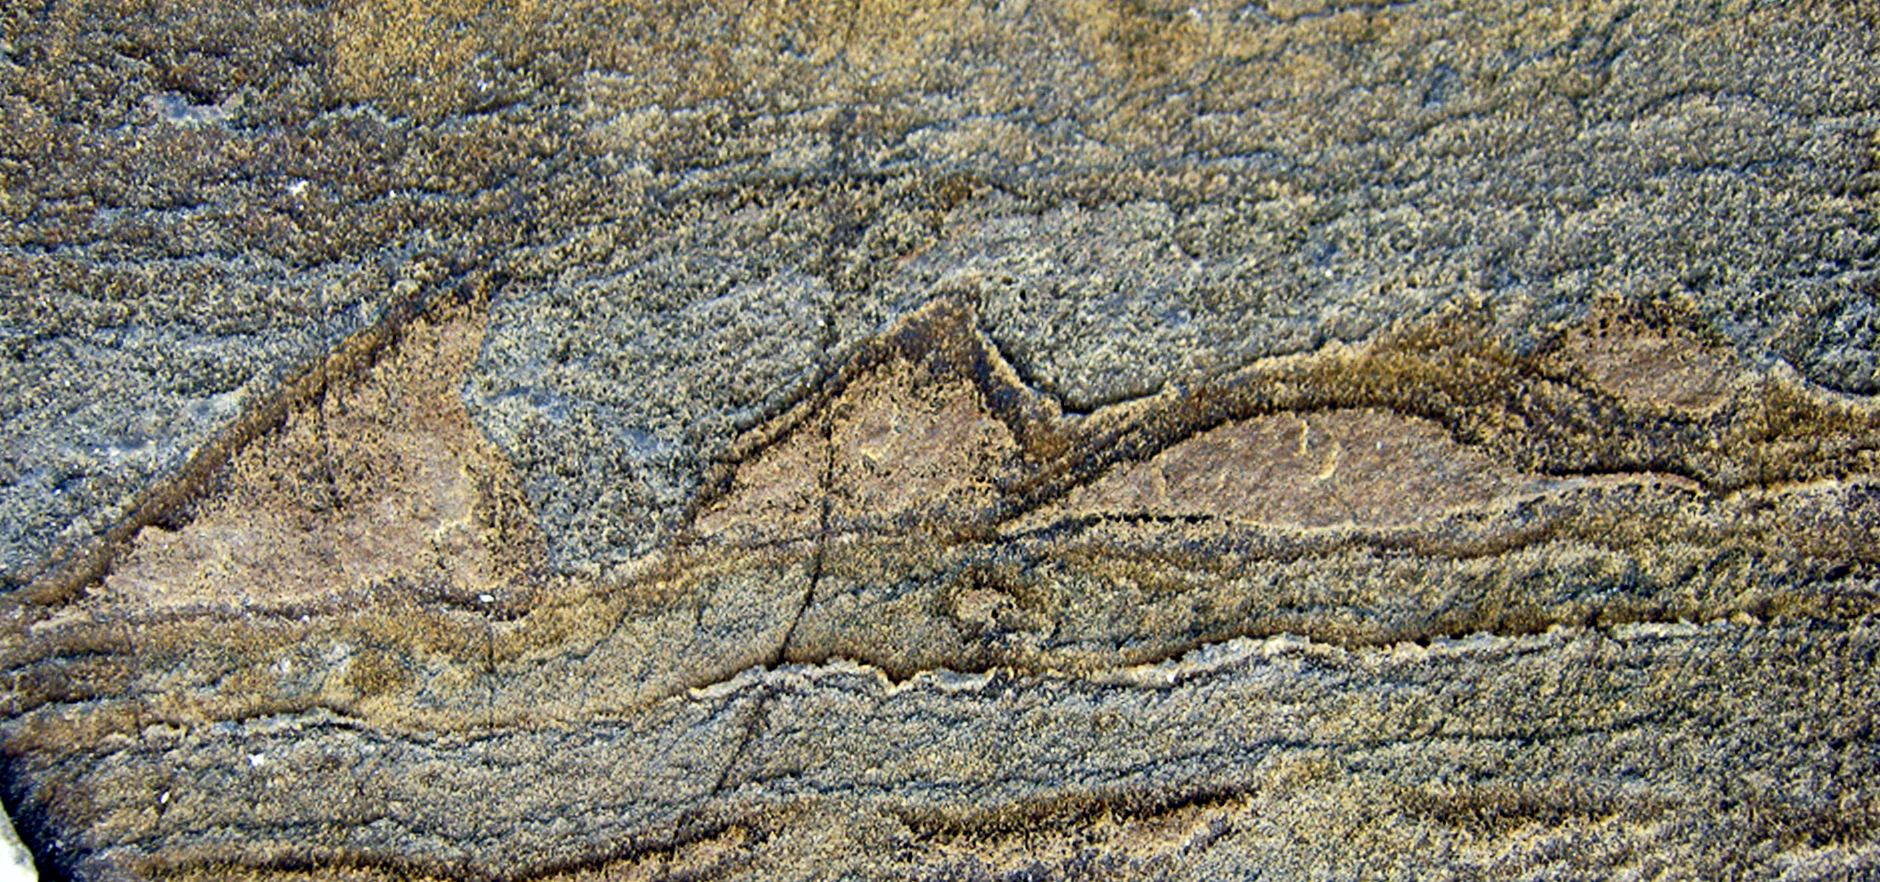 Scientists find what may be oldest fossil on Earth in Greenland